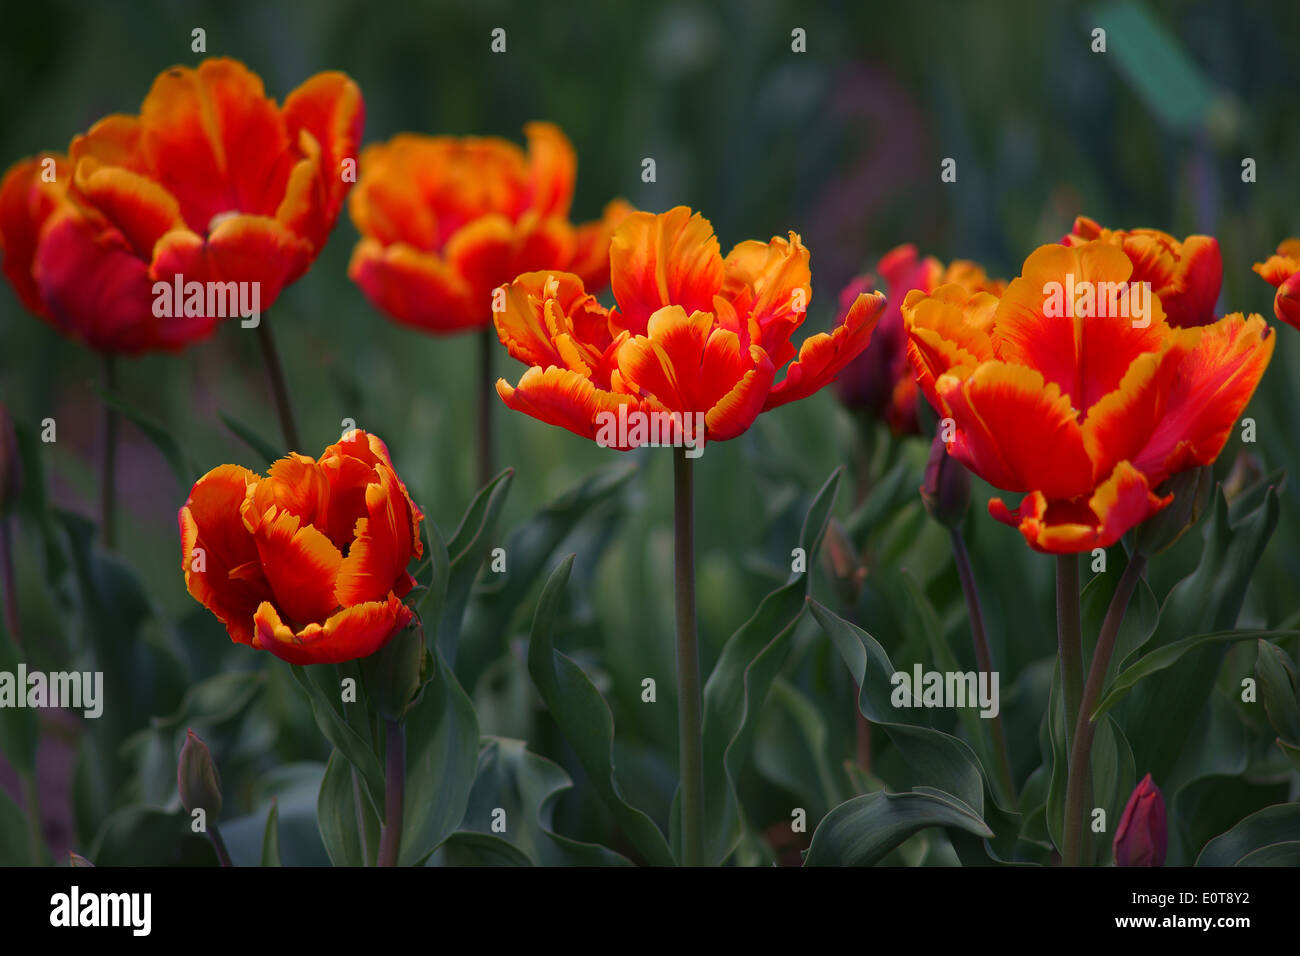 Red tulips with yellow rims Stock Photo